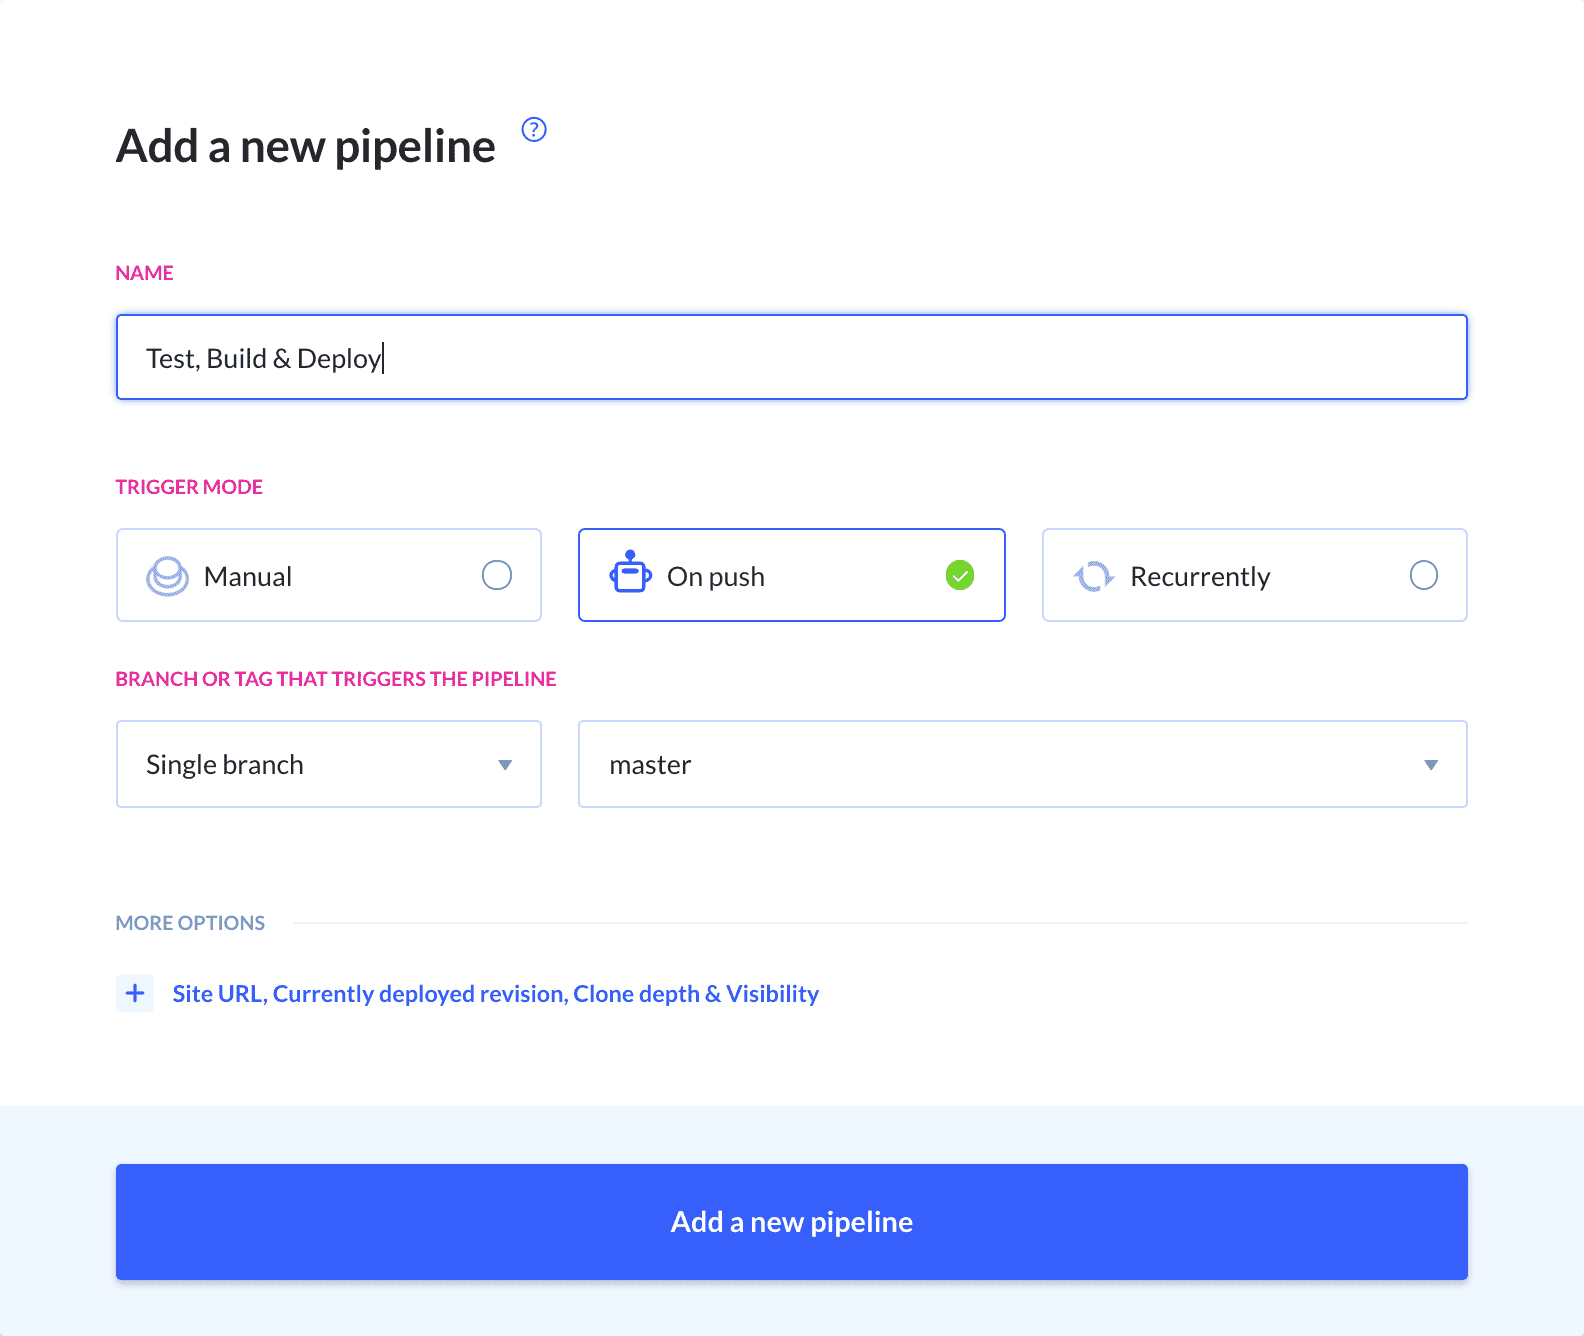 Creating a new pipeline in Buddy